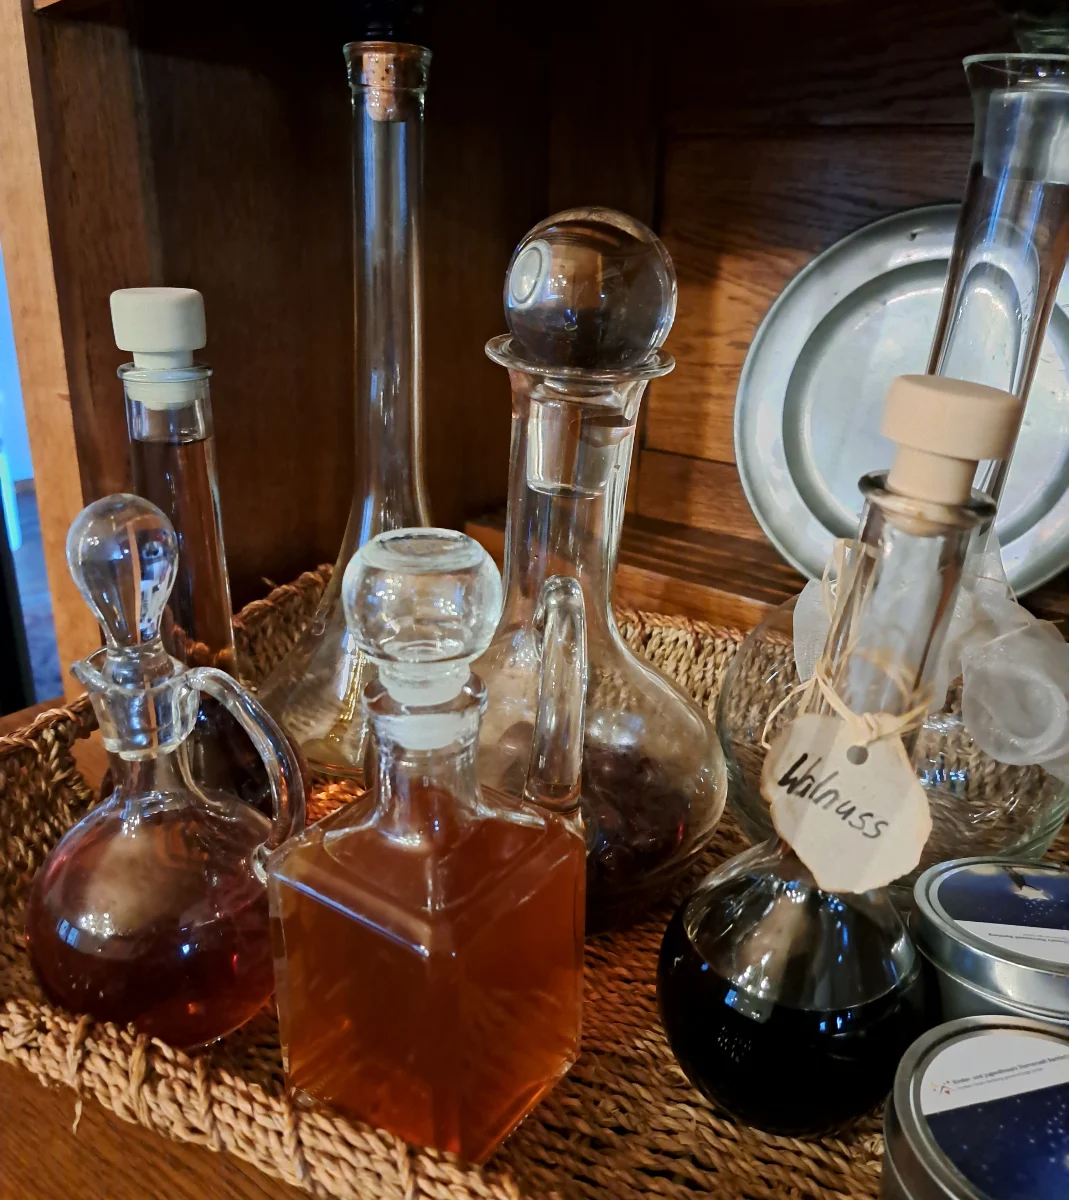 A photo of a variety of homemade liqueurs beautifully presented on a wooden serving board in a cozy living room, placed atop a cabinet or shelf. The liqueurs are arrayed in assorted bottles, creating an inviting liqueur board for guests to enjoy.